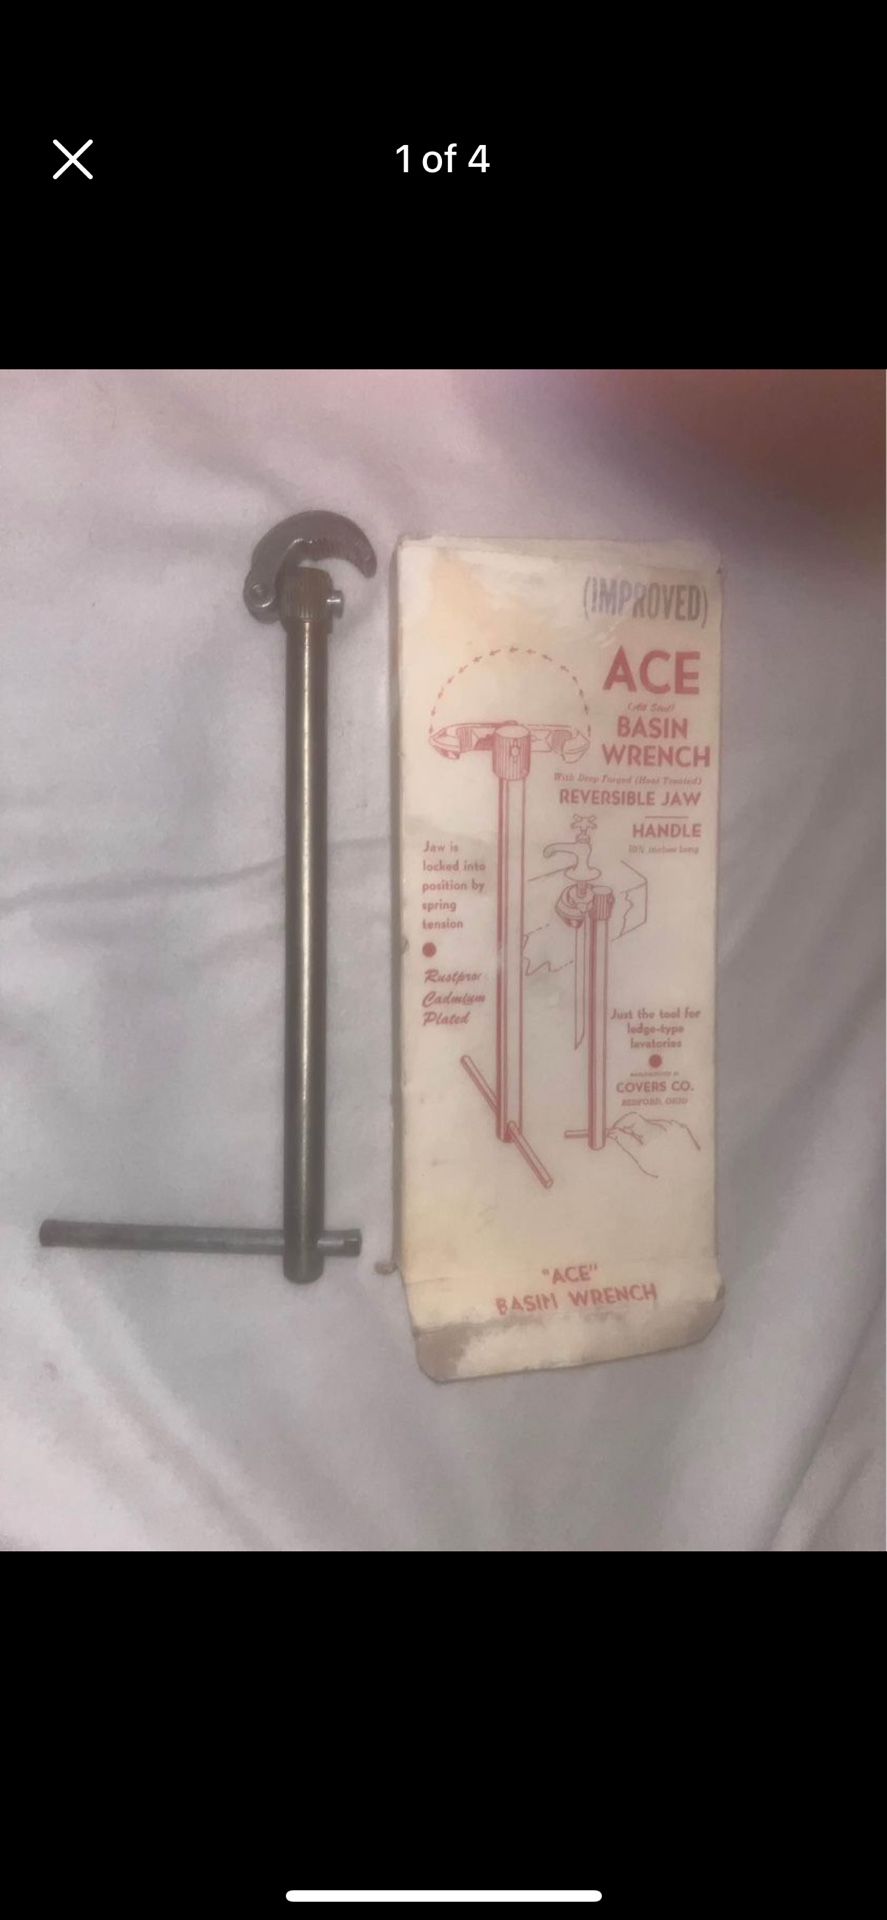 Basin Wrench by Ace